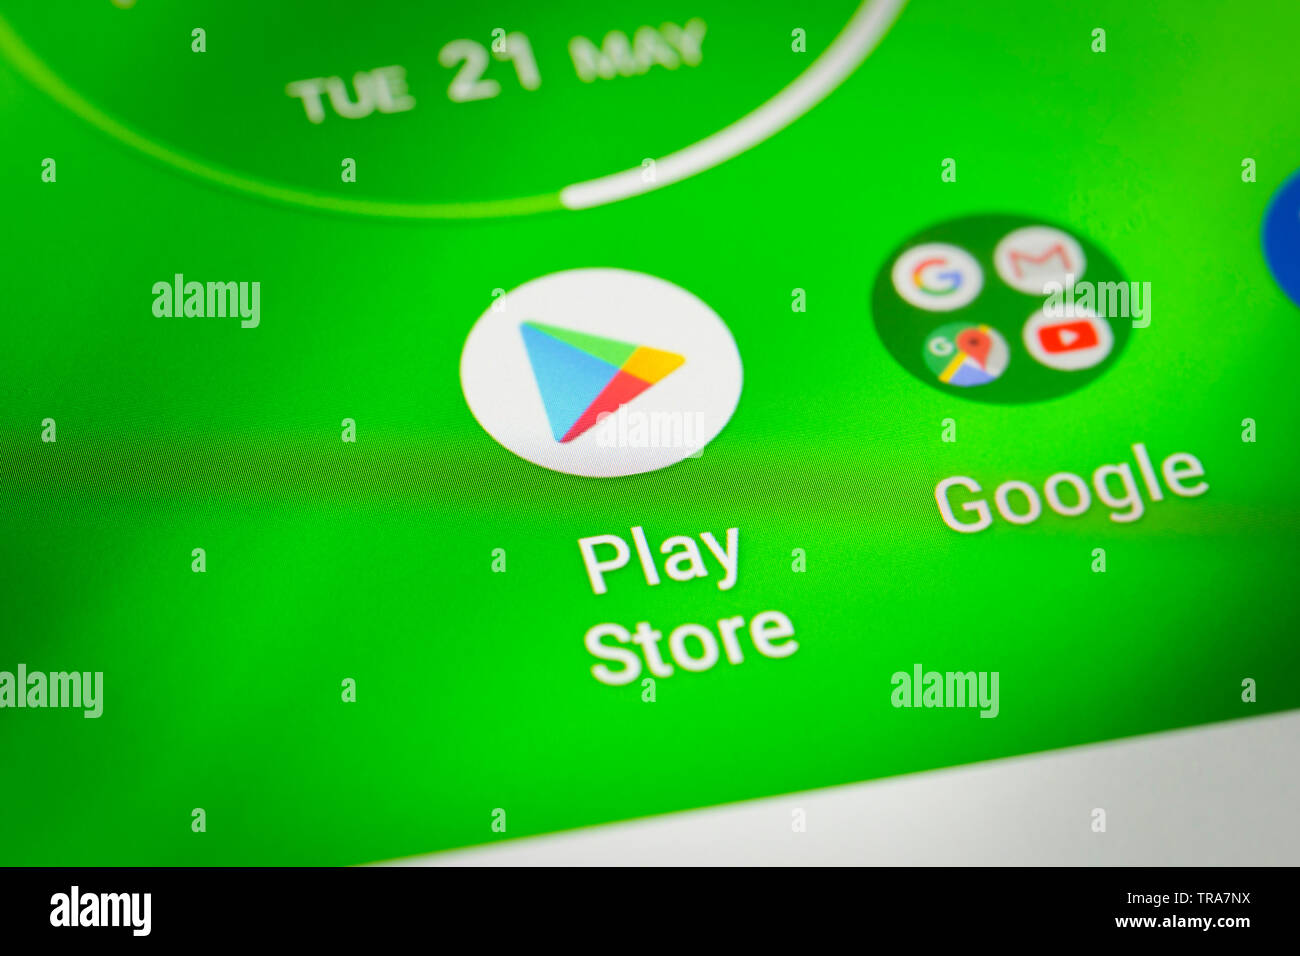 Play store logo icon on mobile phone screen Stock Photo